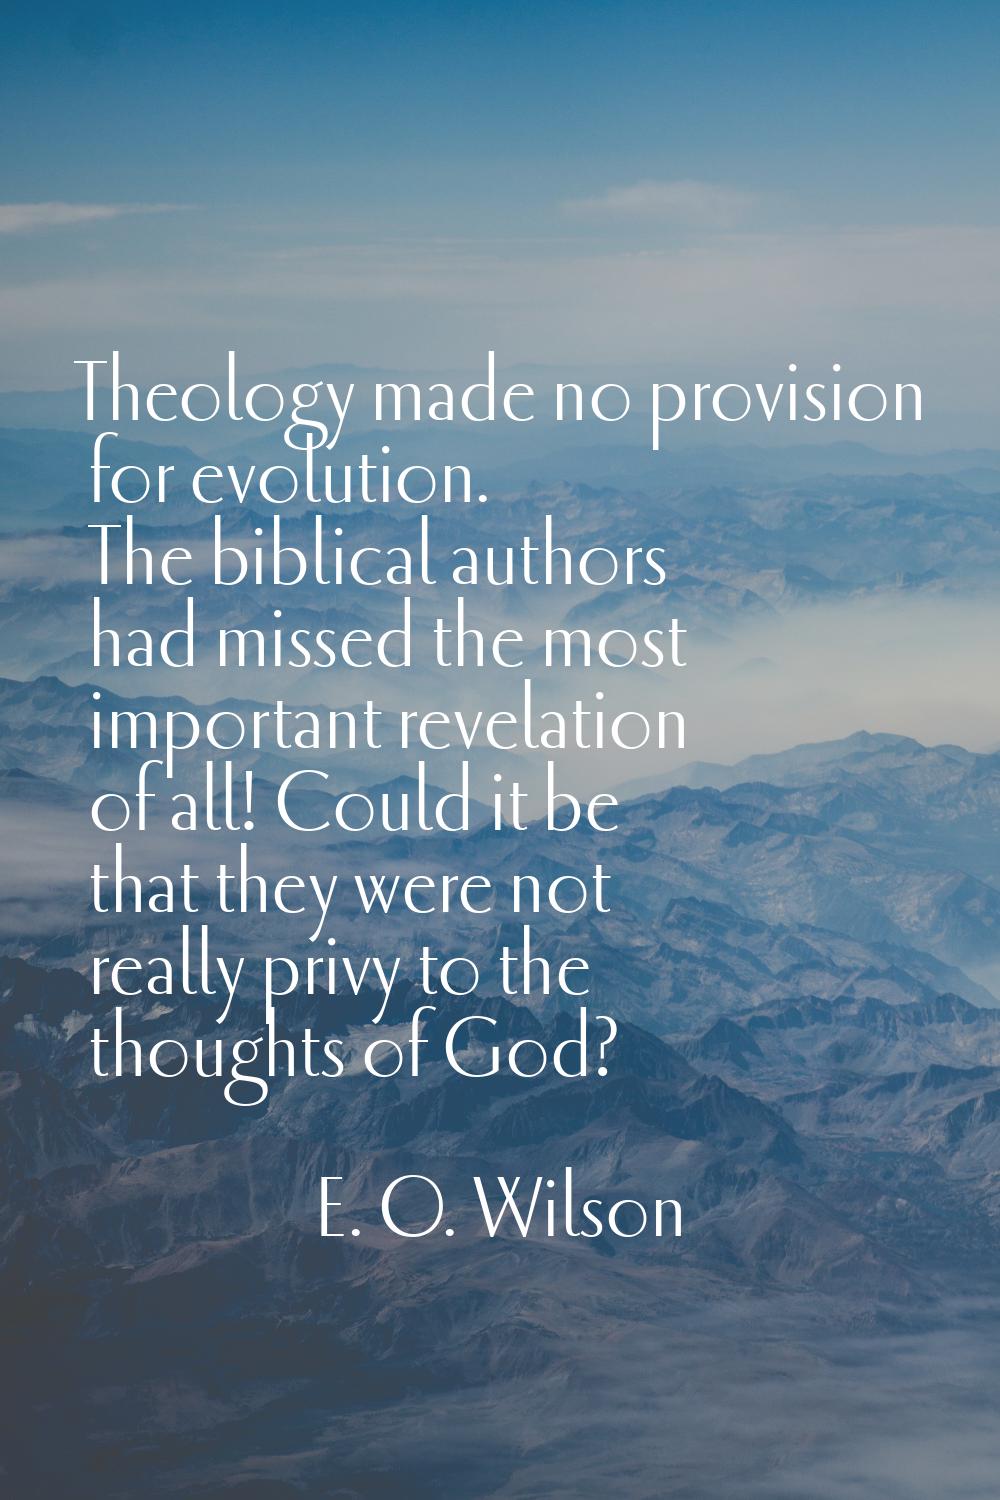 Theology made no provision for evolution. The biblical authors had missed the most important revela